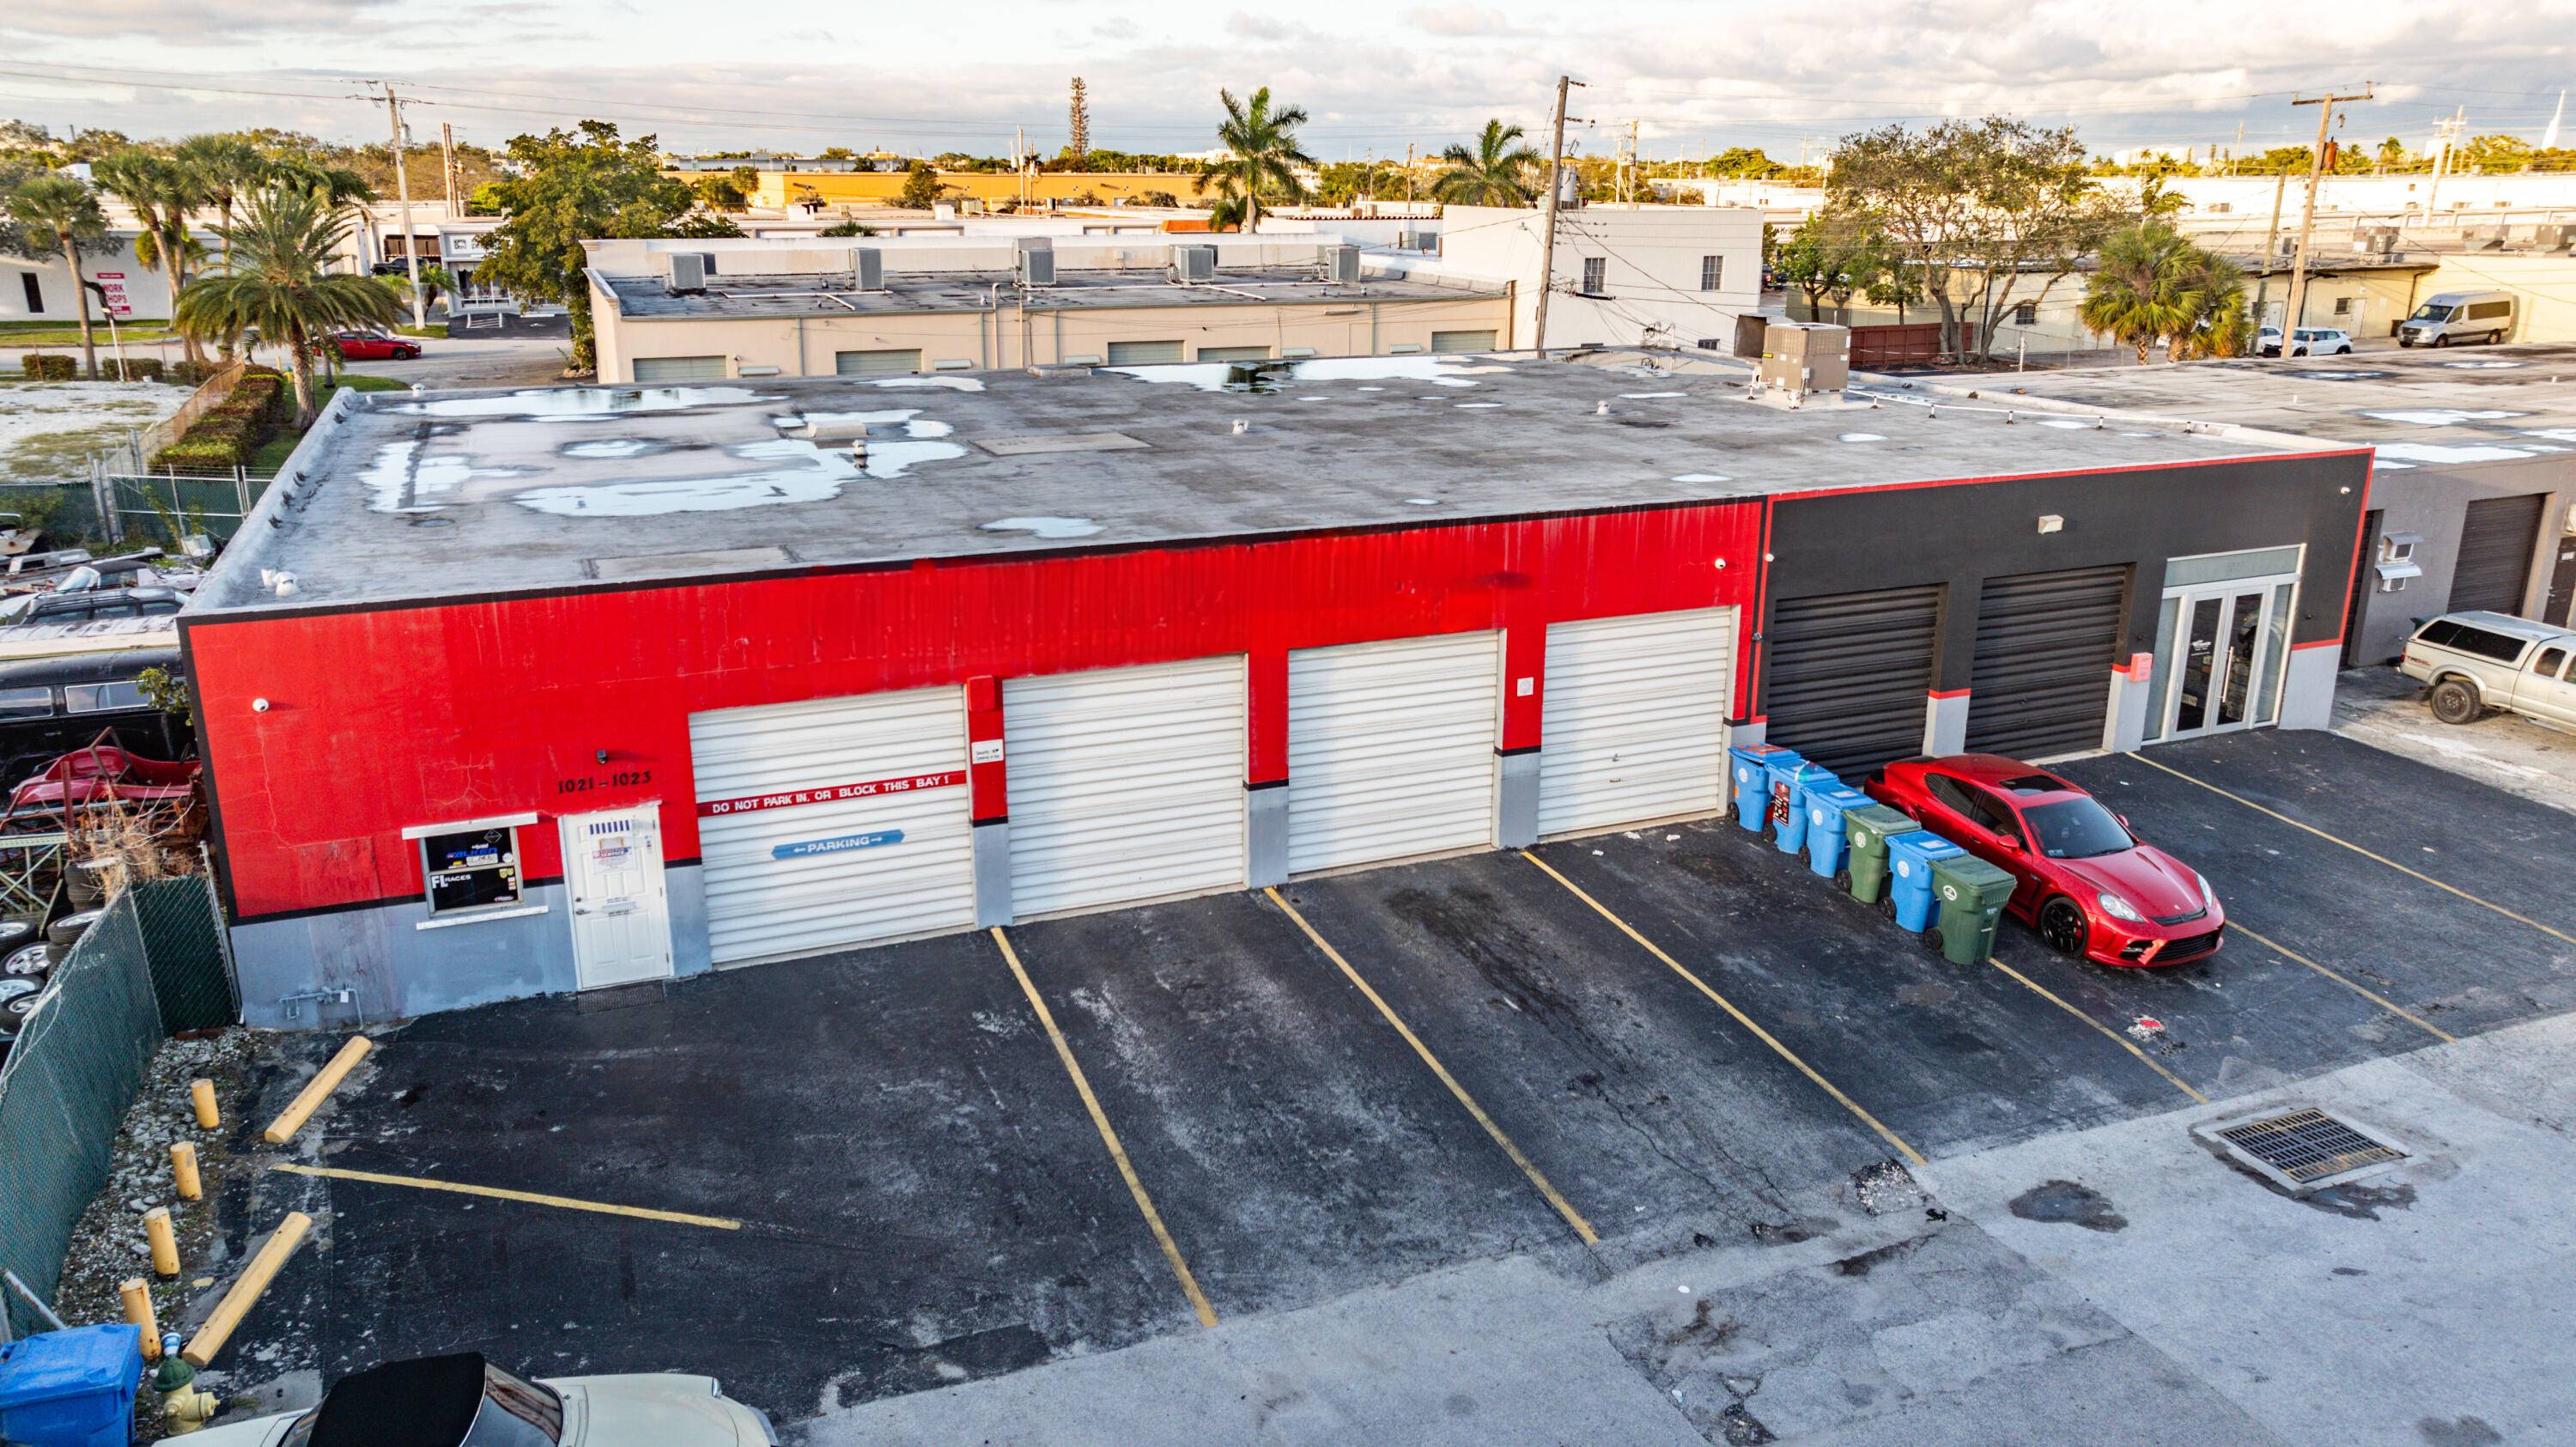 Prime Industrial Auto Repair Property for SaleCurrent use, Auto Repair Business, the inventory and equipment assets can be purchased separate from the sale of the building.